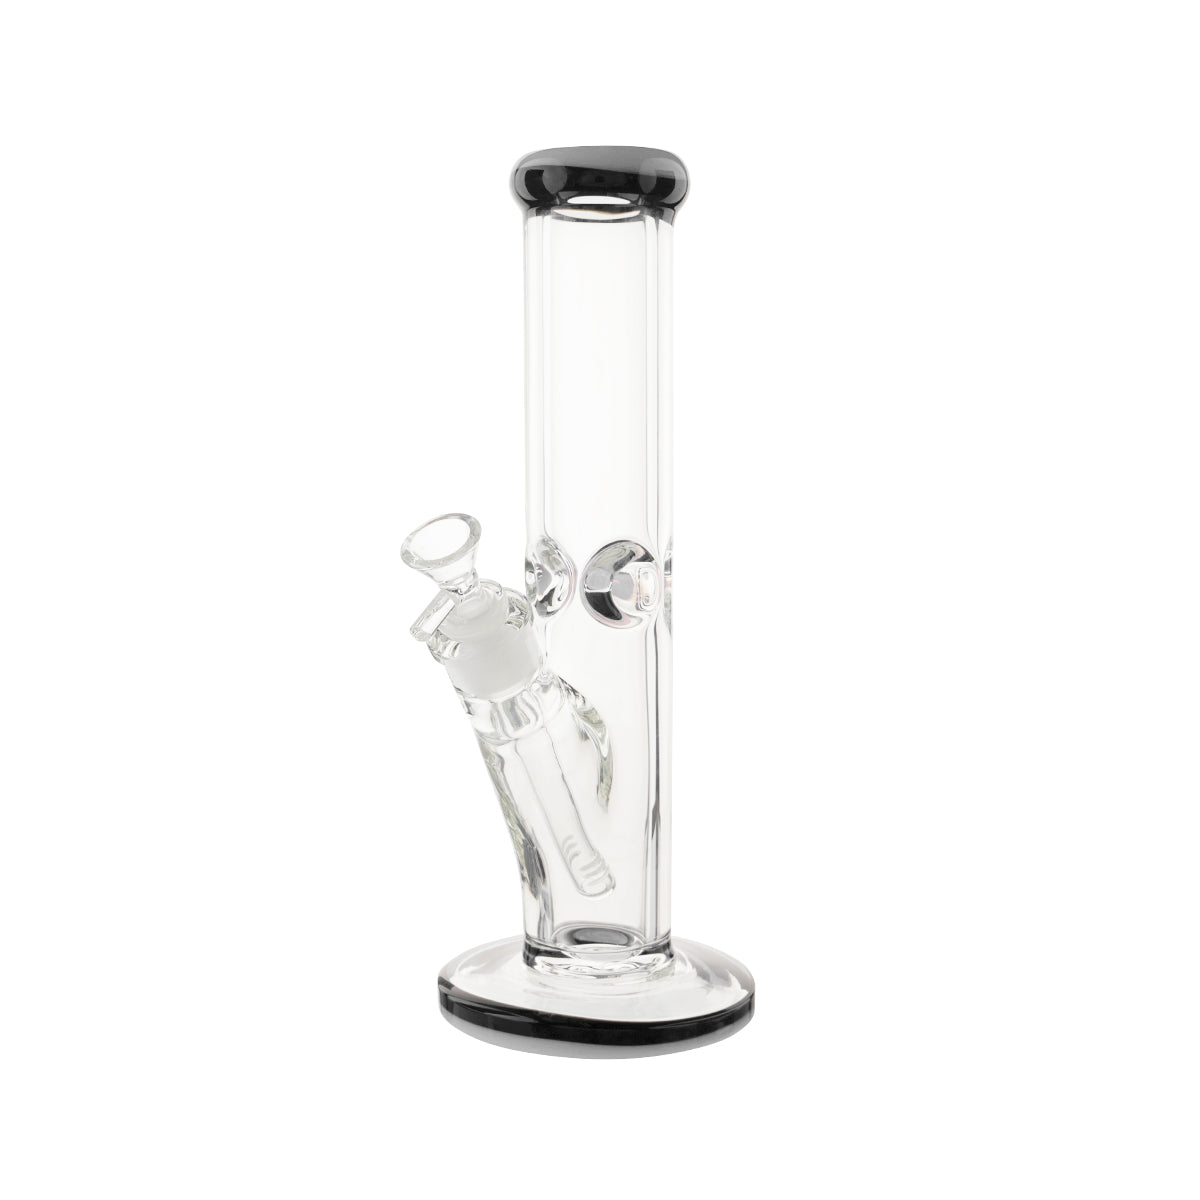 Thus beautifully made water pipe is retro themed with stripes at the base and on the mouth tip. Add these to your collection for a great smoking sesh.